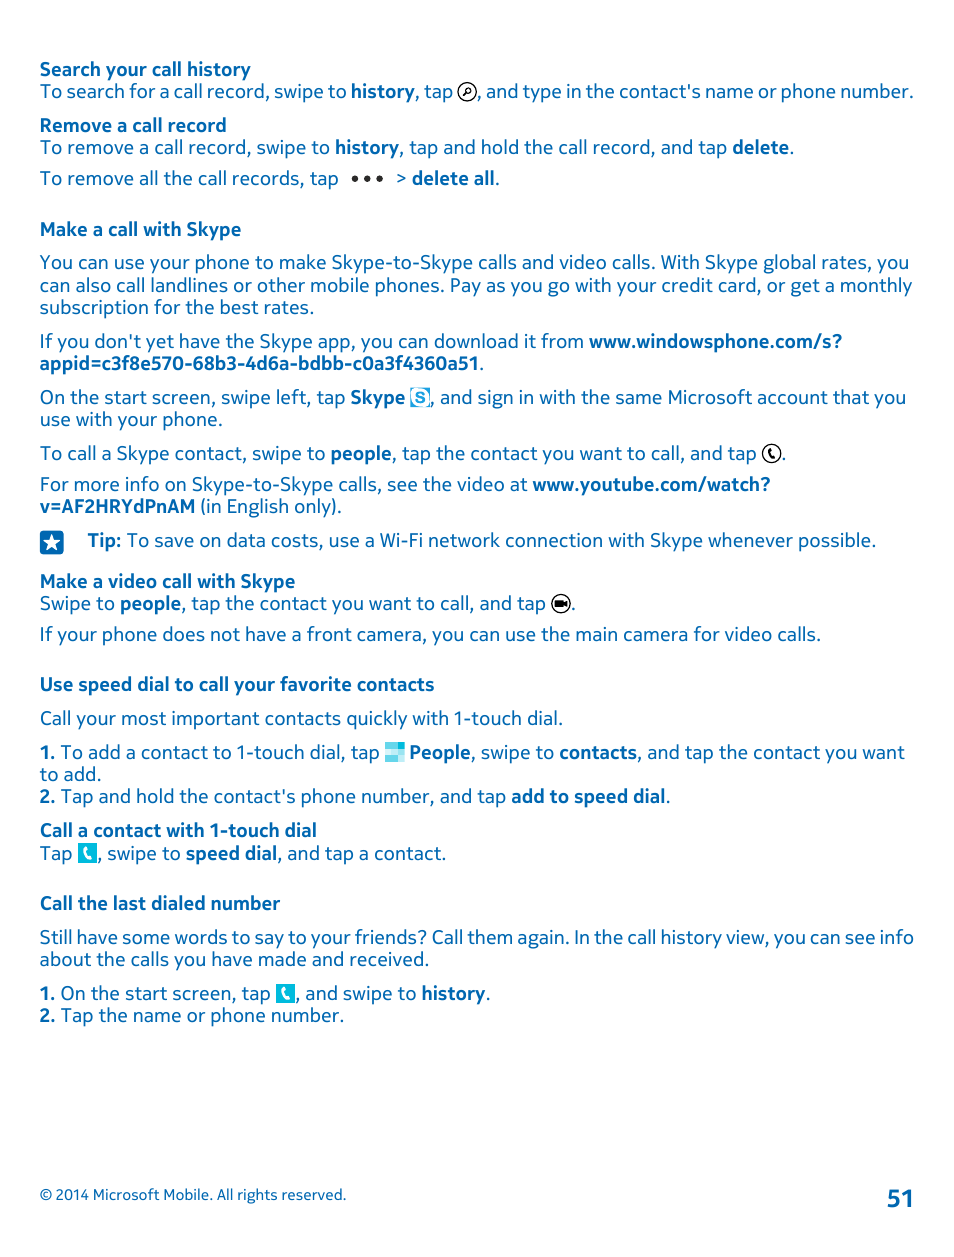 Make a call with skype, Use speed dial to call your favorite contacts, Call  the last dialed number | Nokia Lumia 635 User Manual | Page 51 / 113 |  Original mode